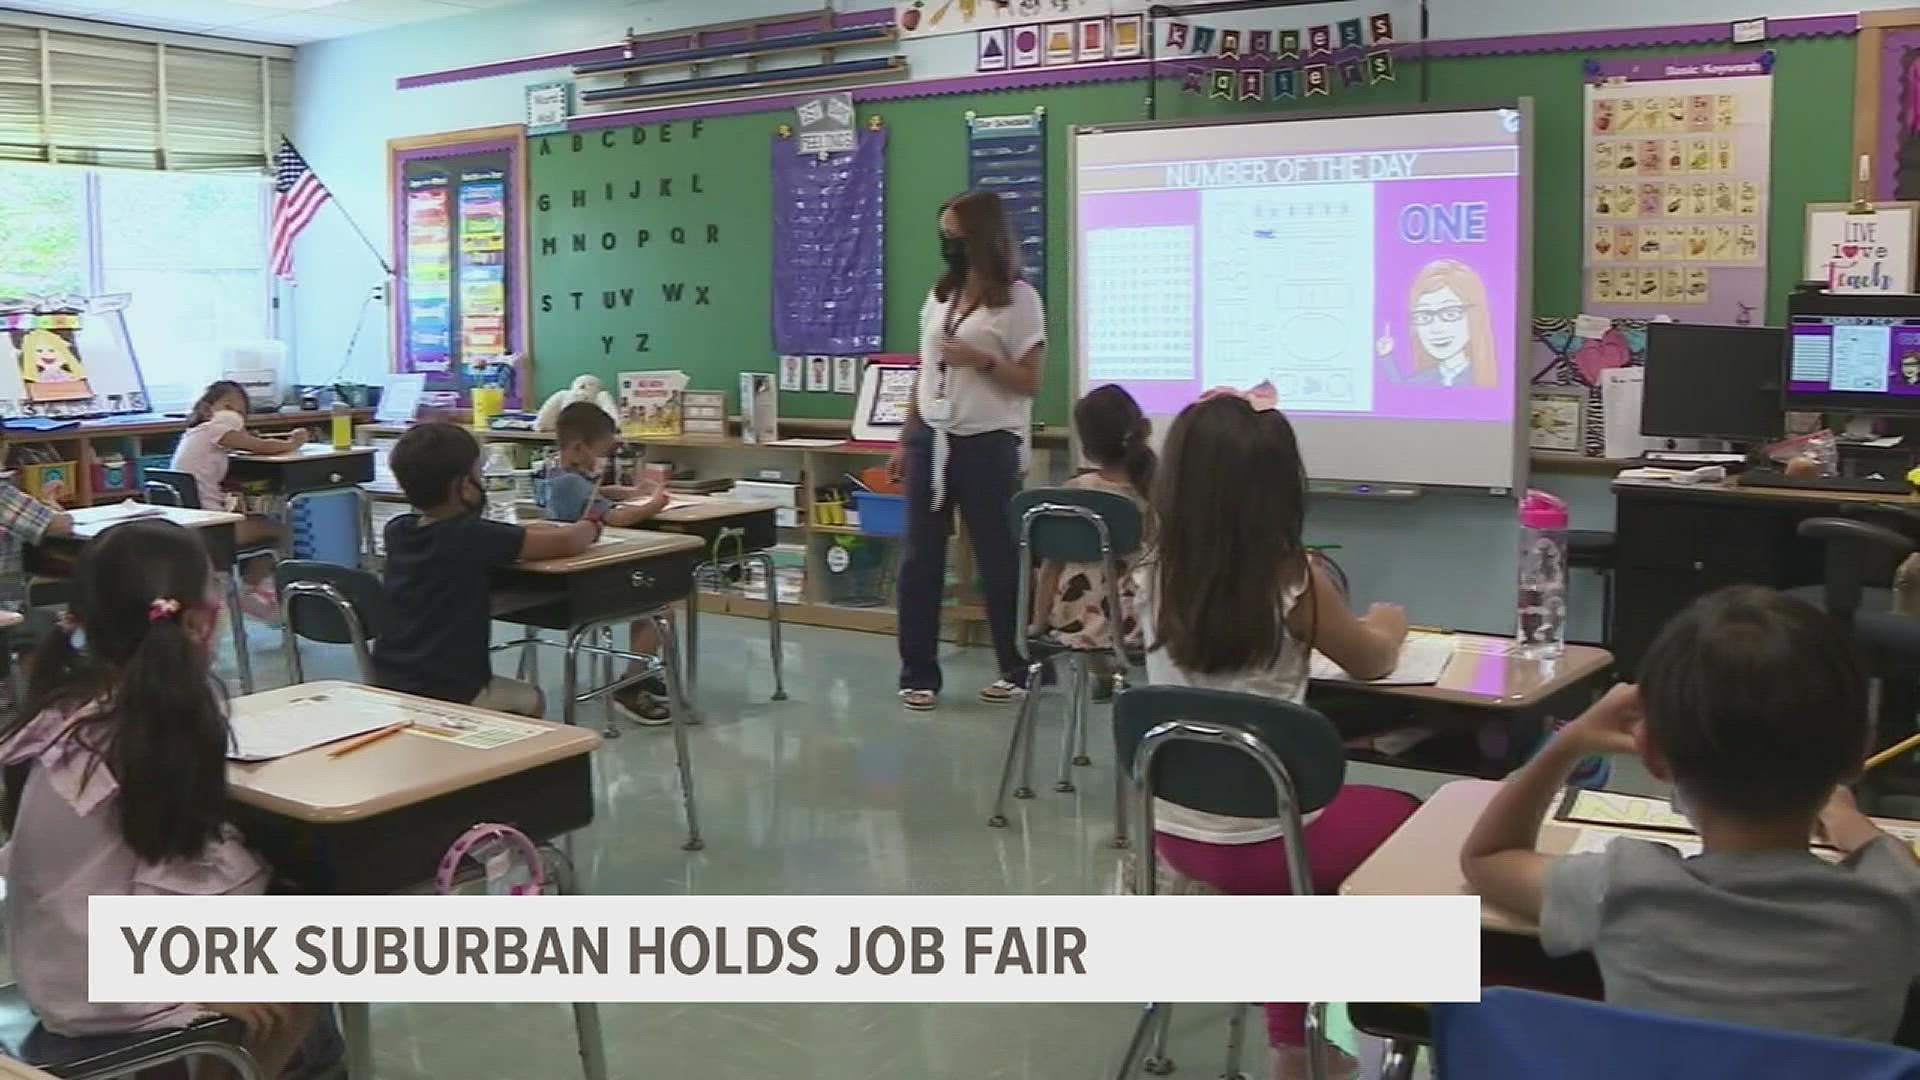 The job fair aims to fill support staff and substitute teacher positions in the school district